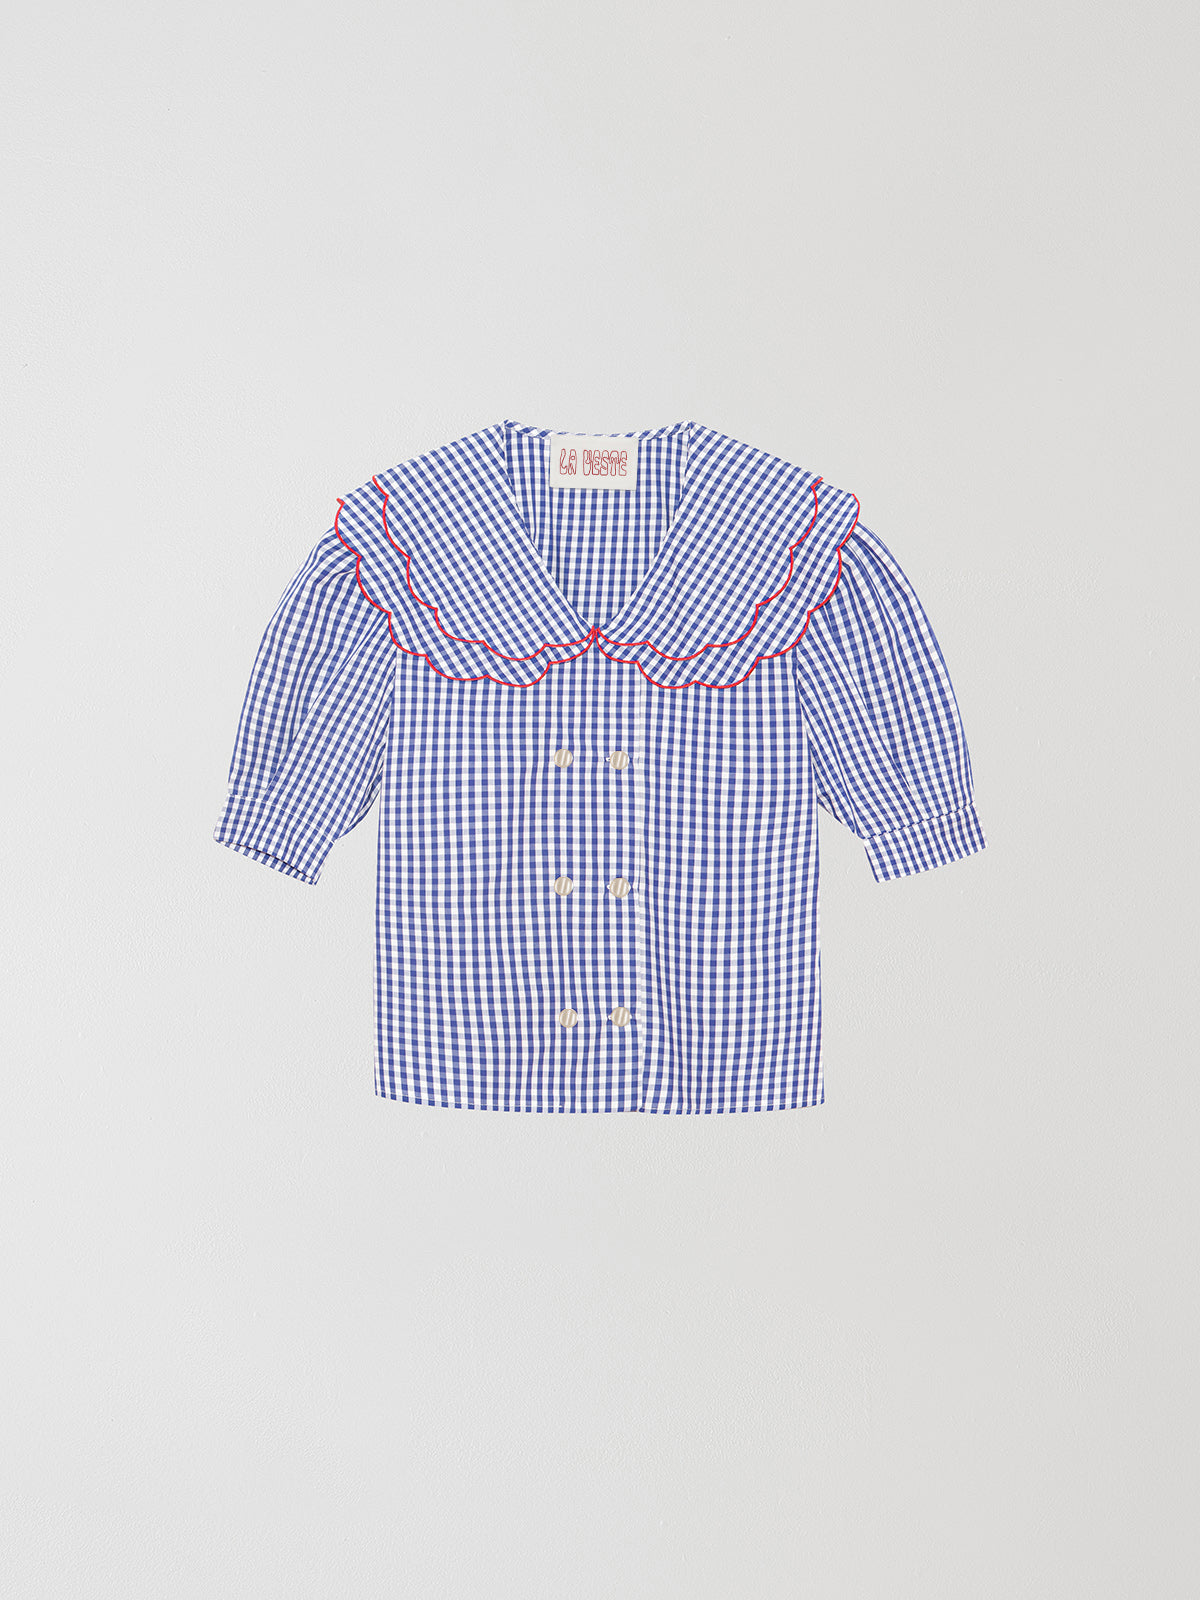 Navy and white vichy check shirt with short sleeves made in cotton